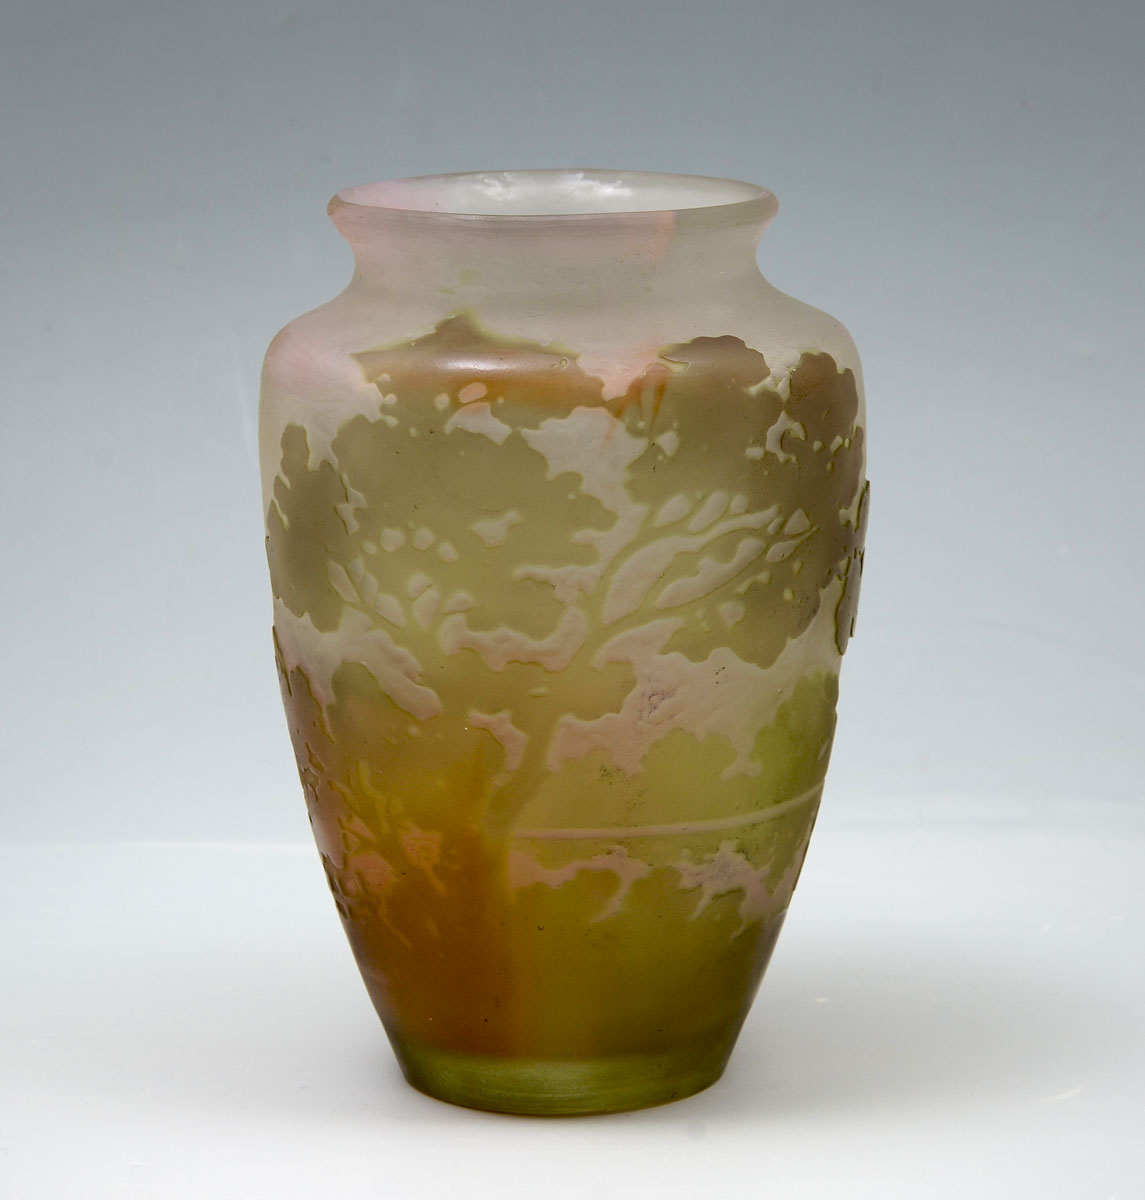 EARLY 20TH GALLE VASE: Galle vase